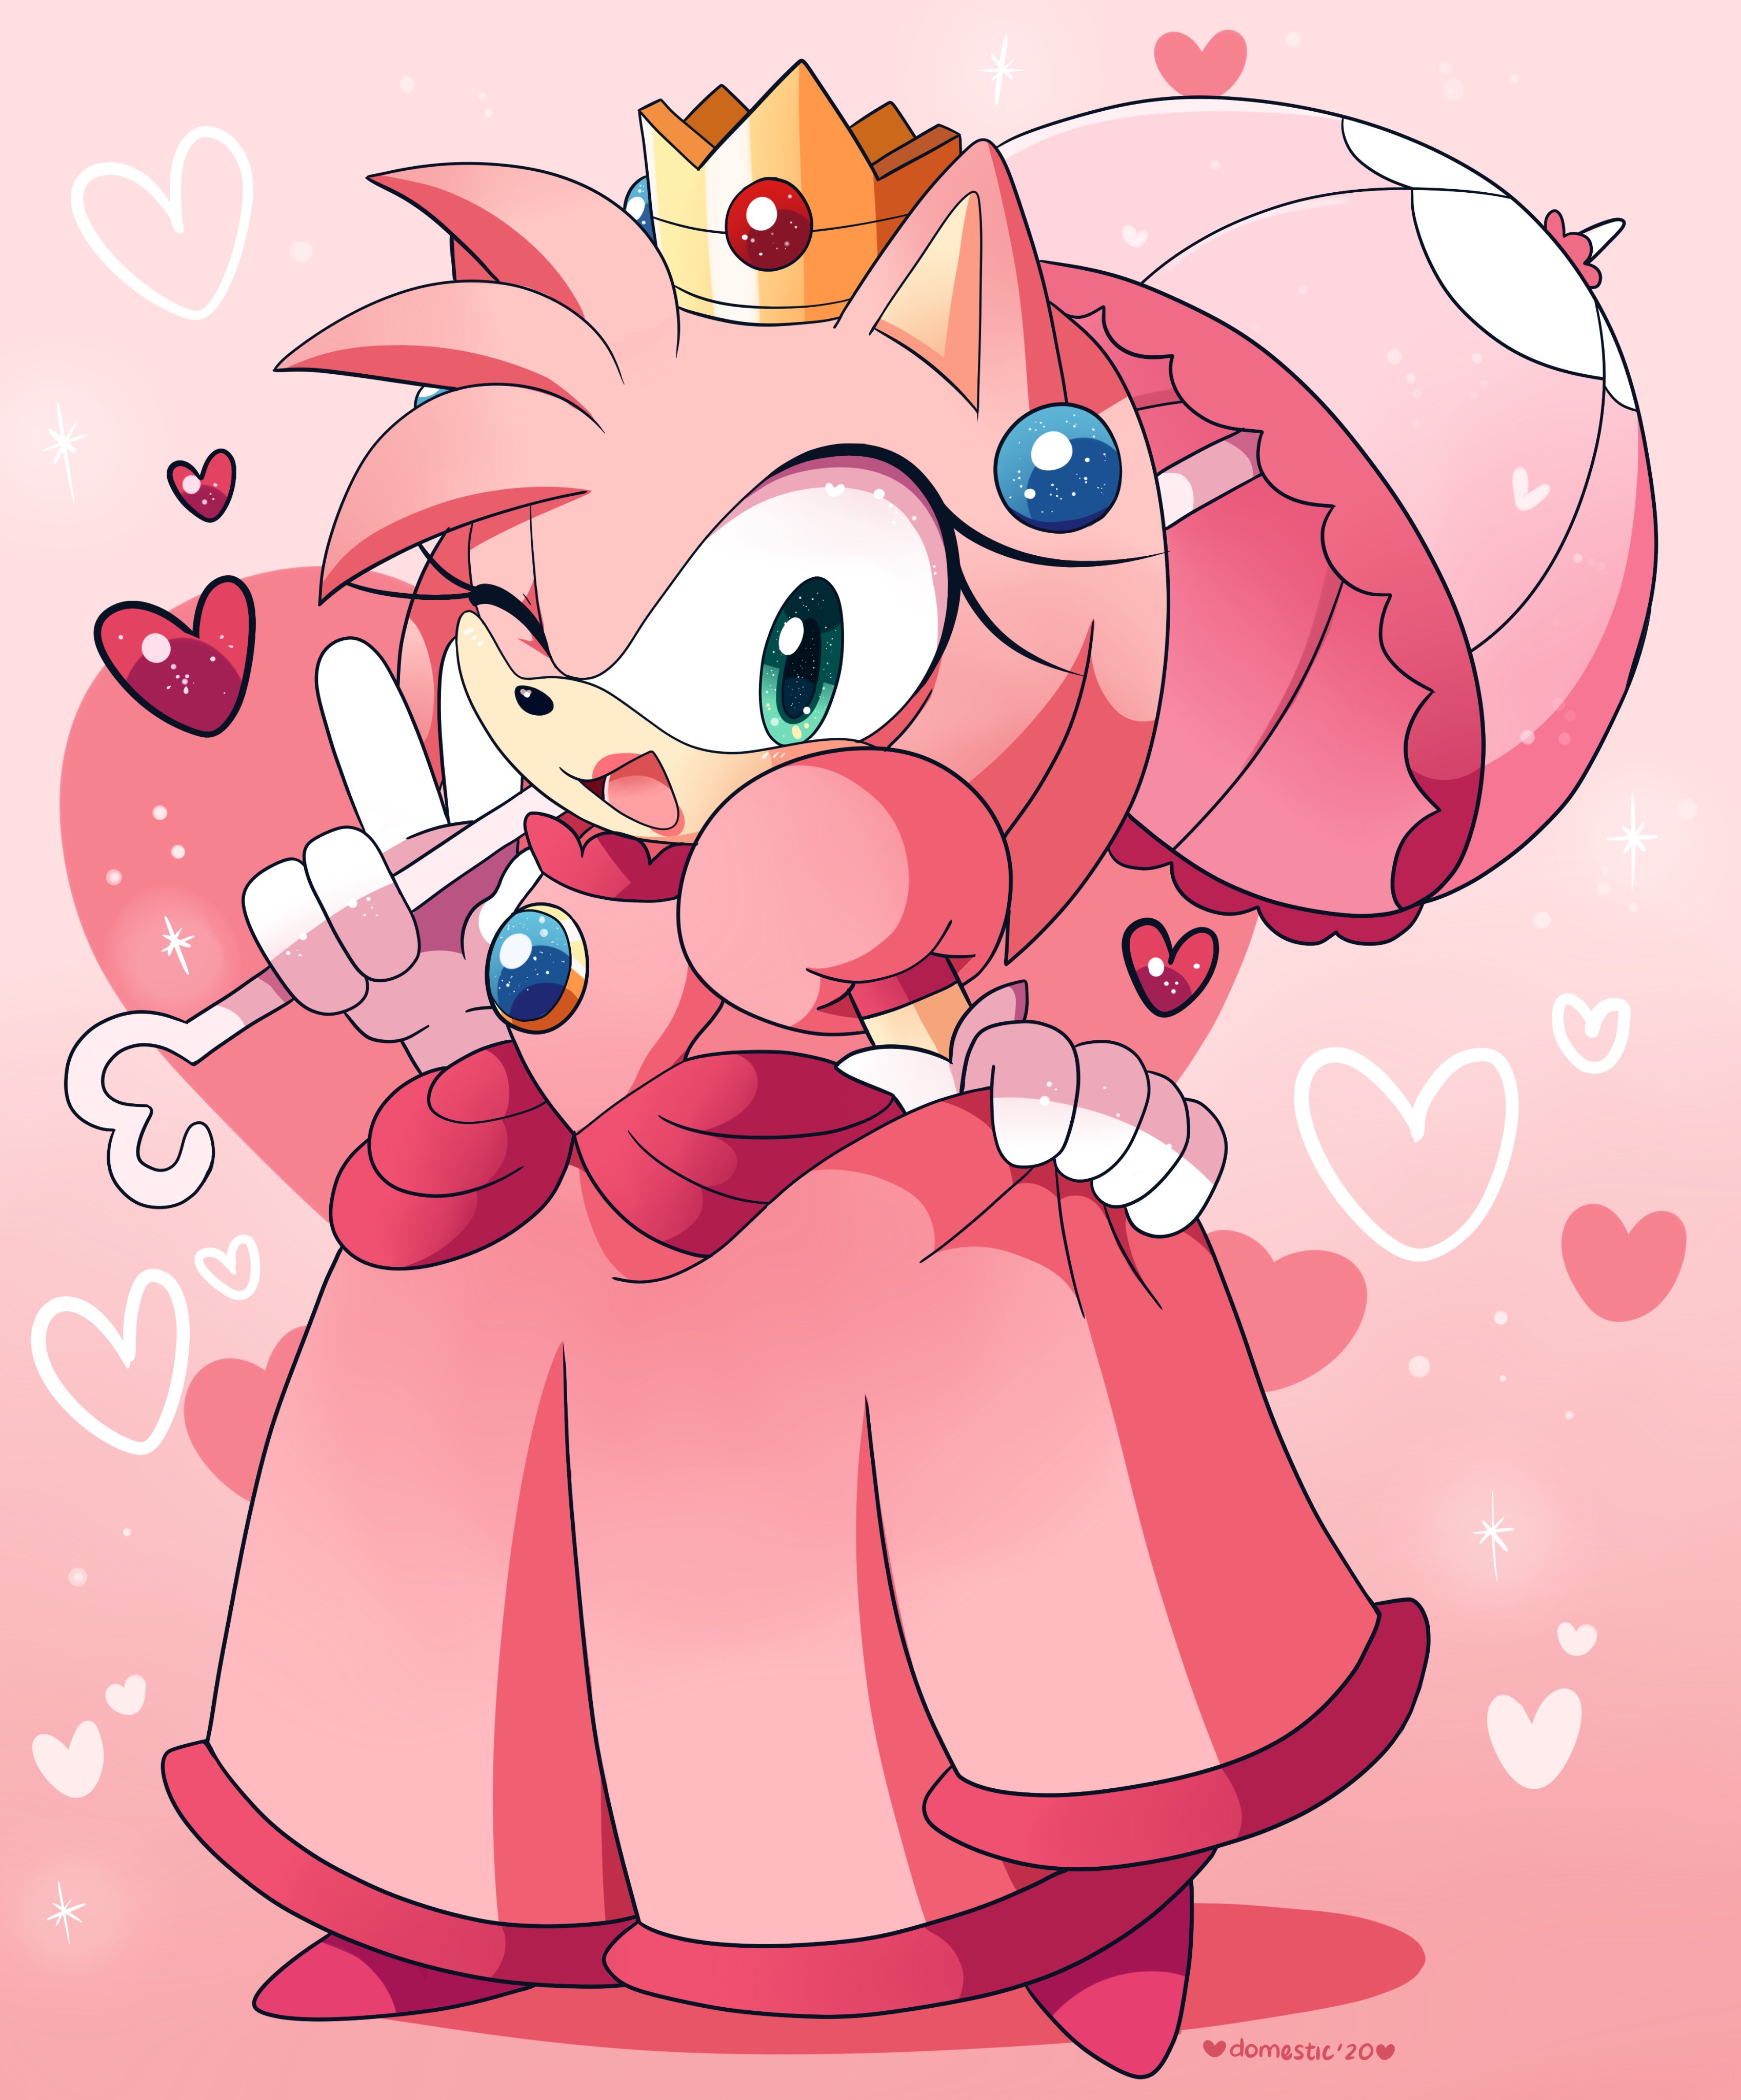 Starting with Amy Rose dressed as Princess Peach! 